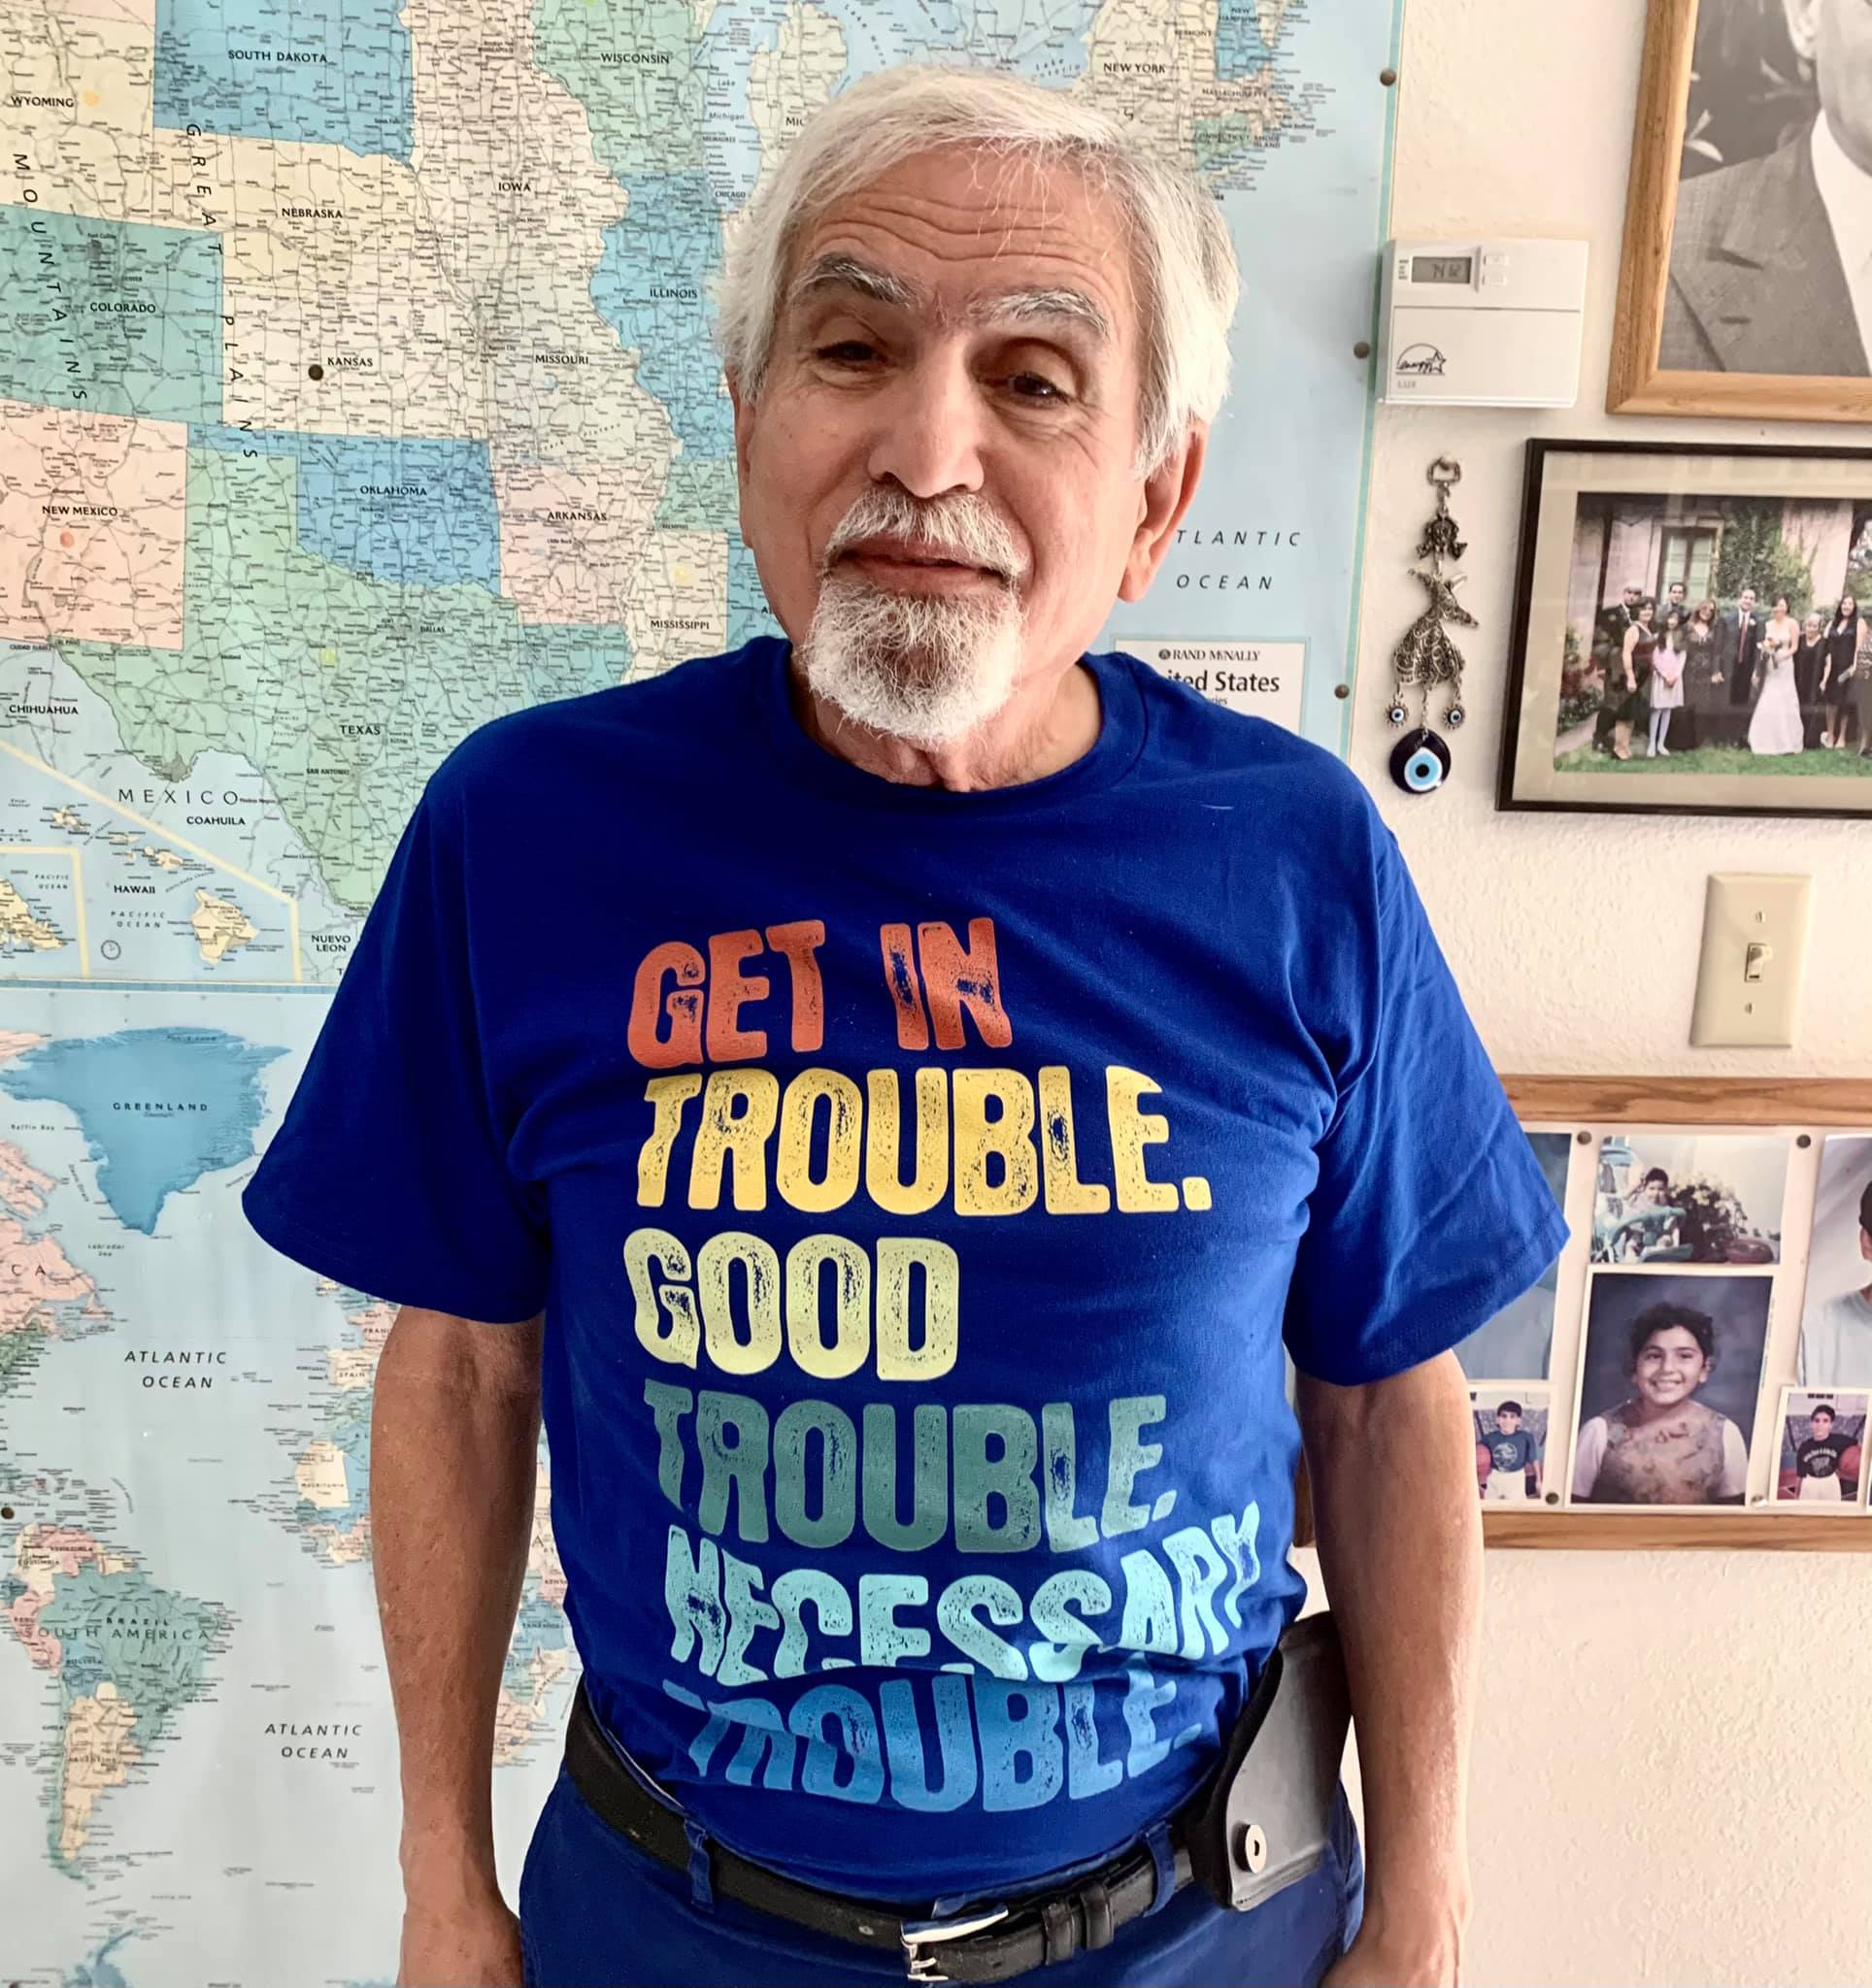 Yours truly, wearing a T-shirt with John Lewis's words: 'Get in trouble. Good trouble. Necessary trouble'